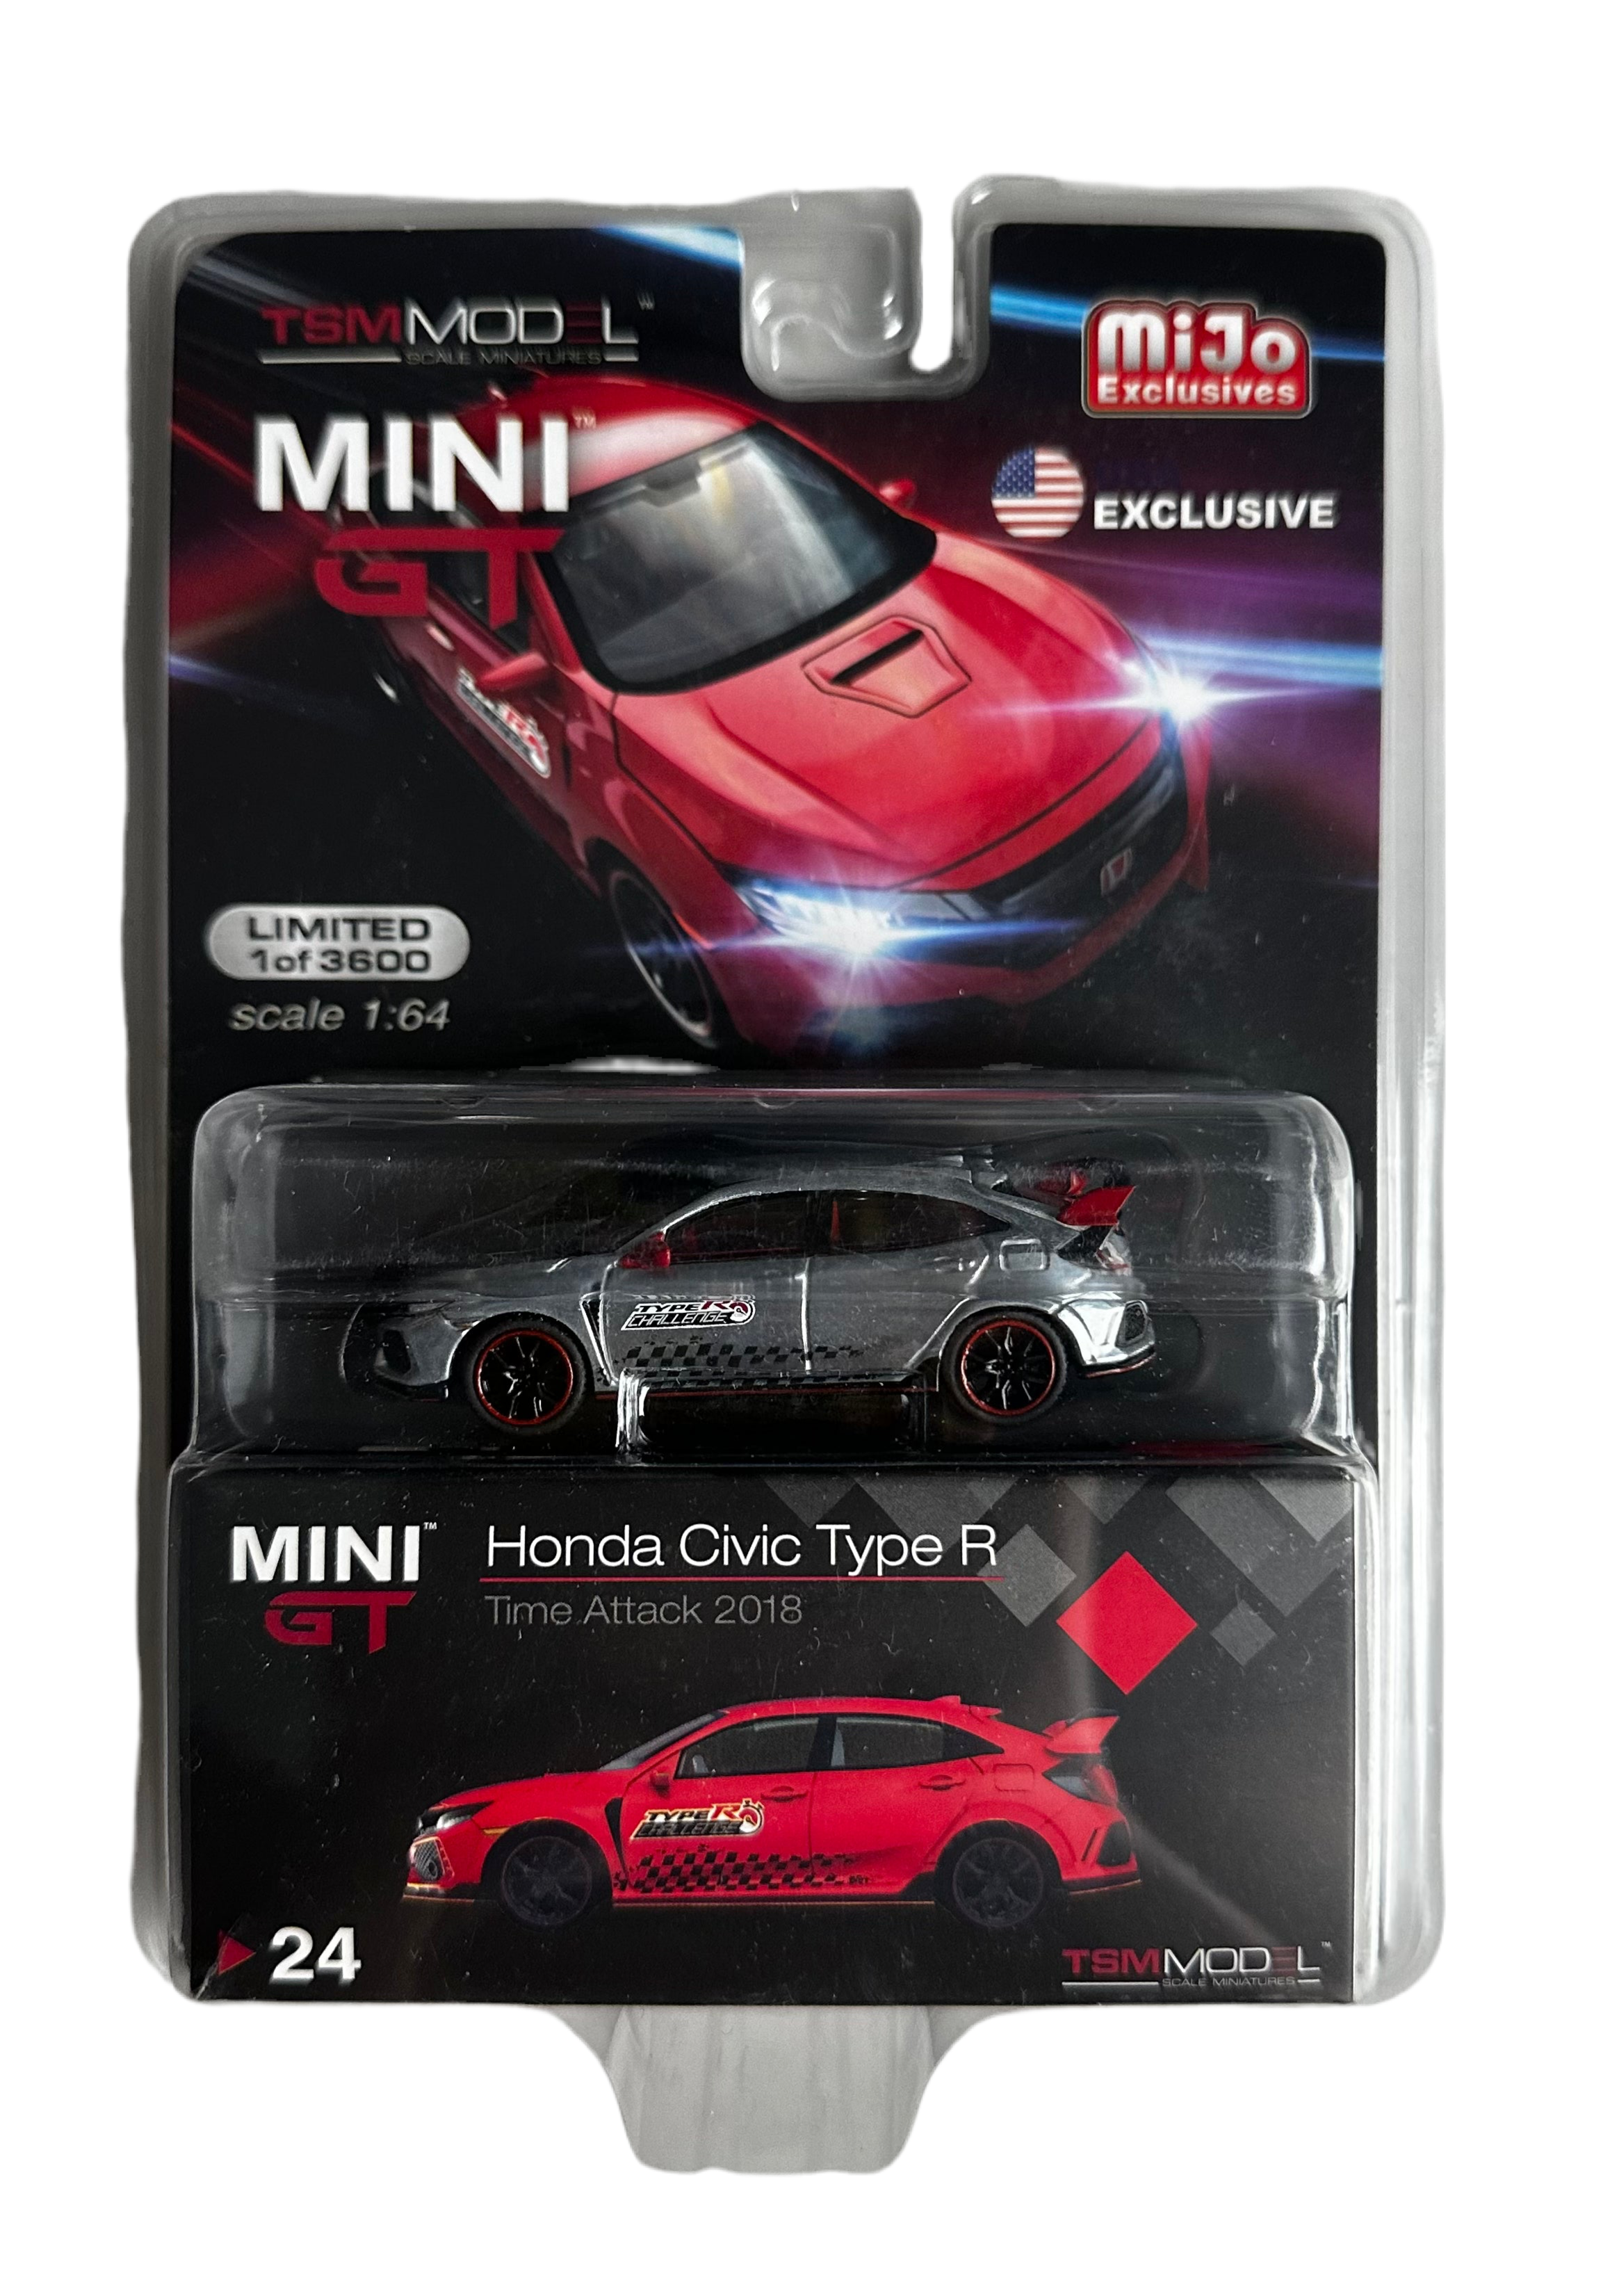 1/64 HONDA CIVIC TYPE R - TIME ATTACK 2018 “CHASE” (RAW EDITION)